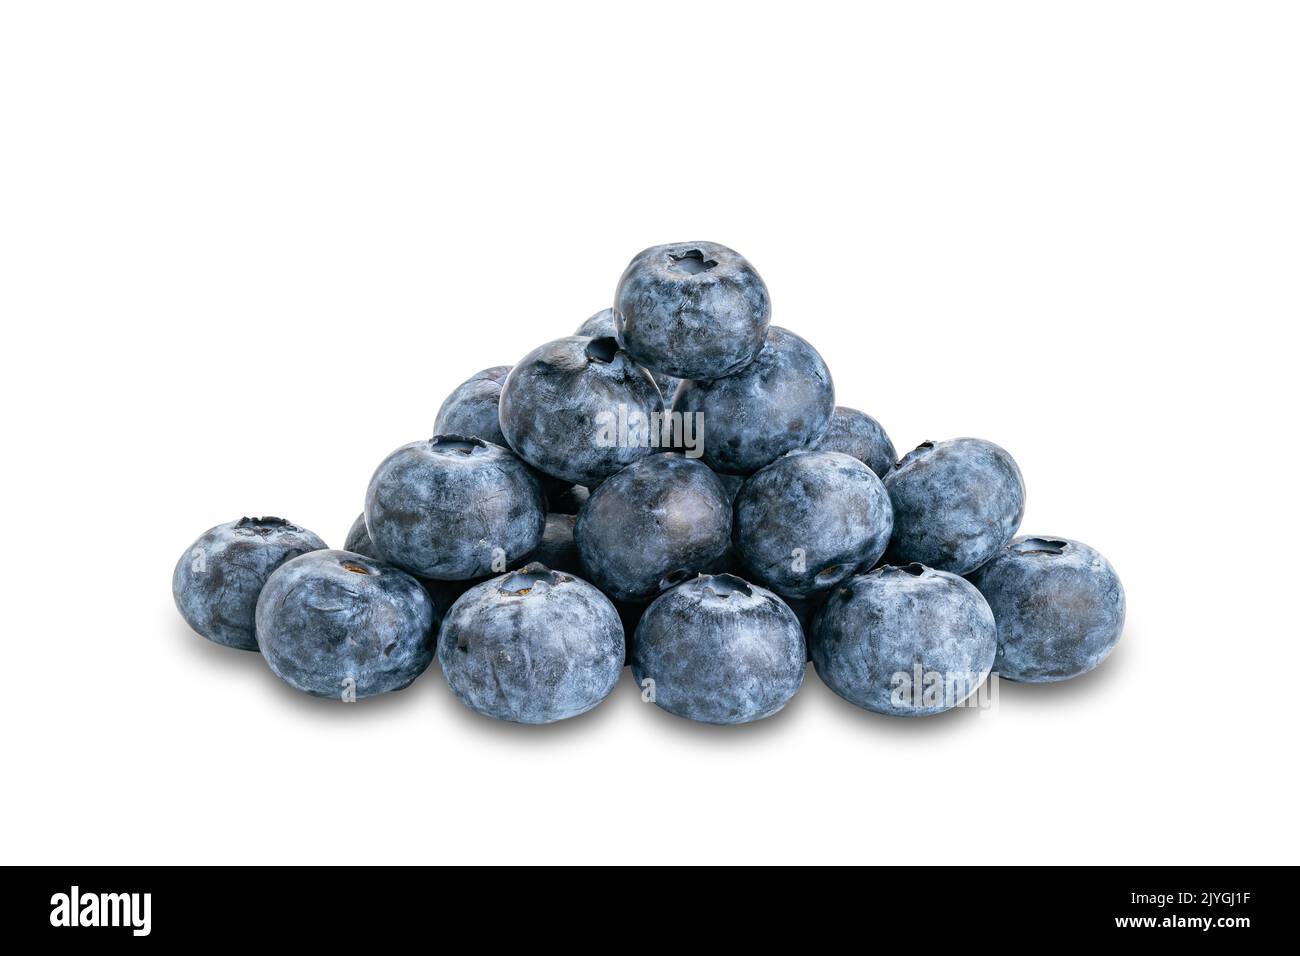 Pile of fresh ripe blueberry isolated on white background with clipping path. Stock Photo